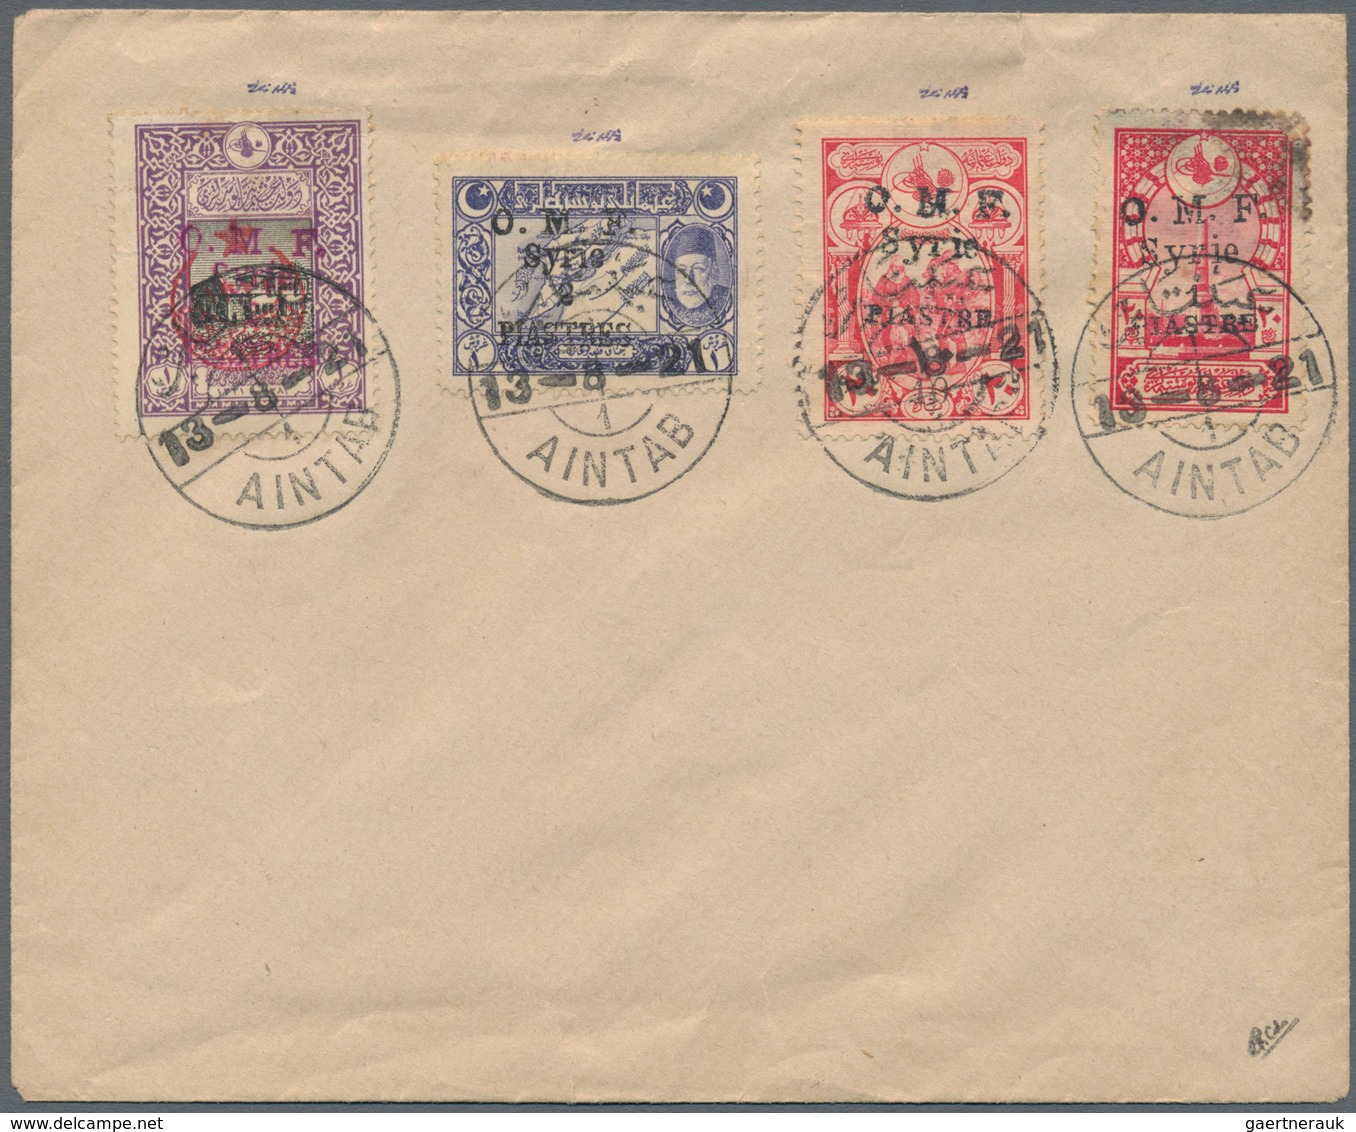 Syrien: 1899-1960, 30 Covers & Cards From Ottoman Period To Modern, Early Overprinted Issues, Air Ma - Syrië